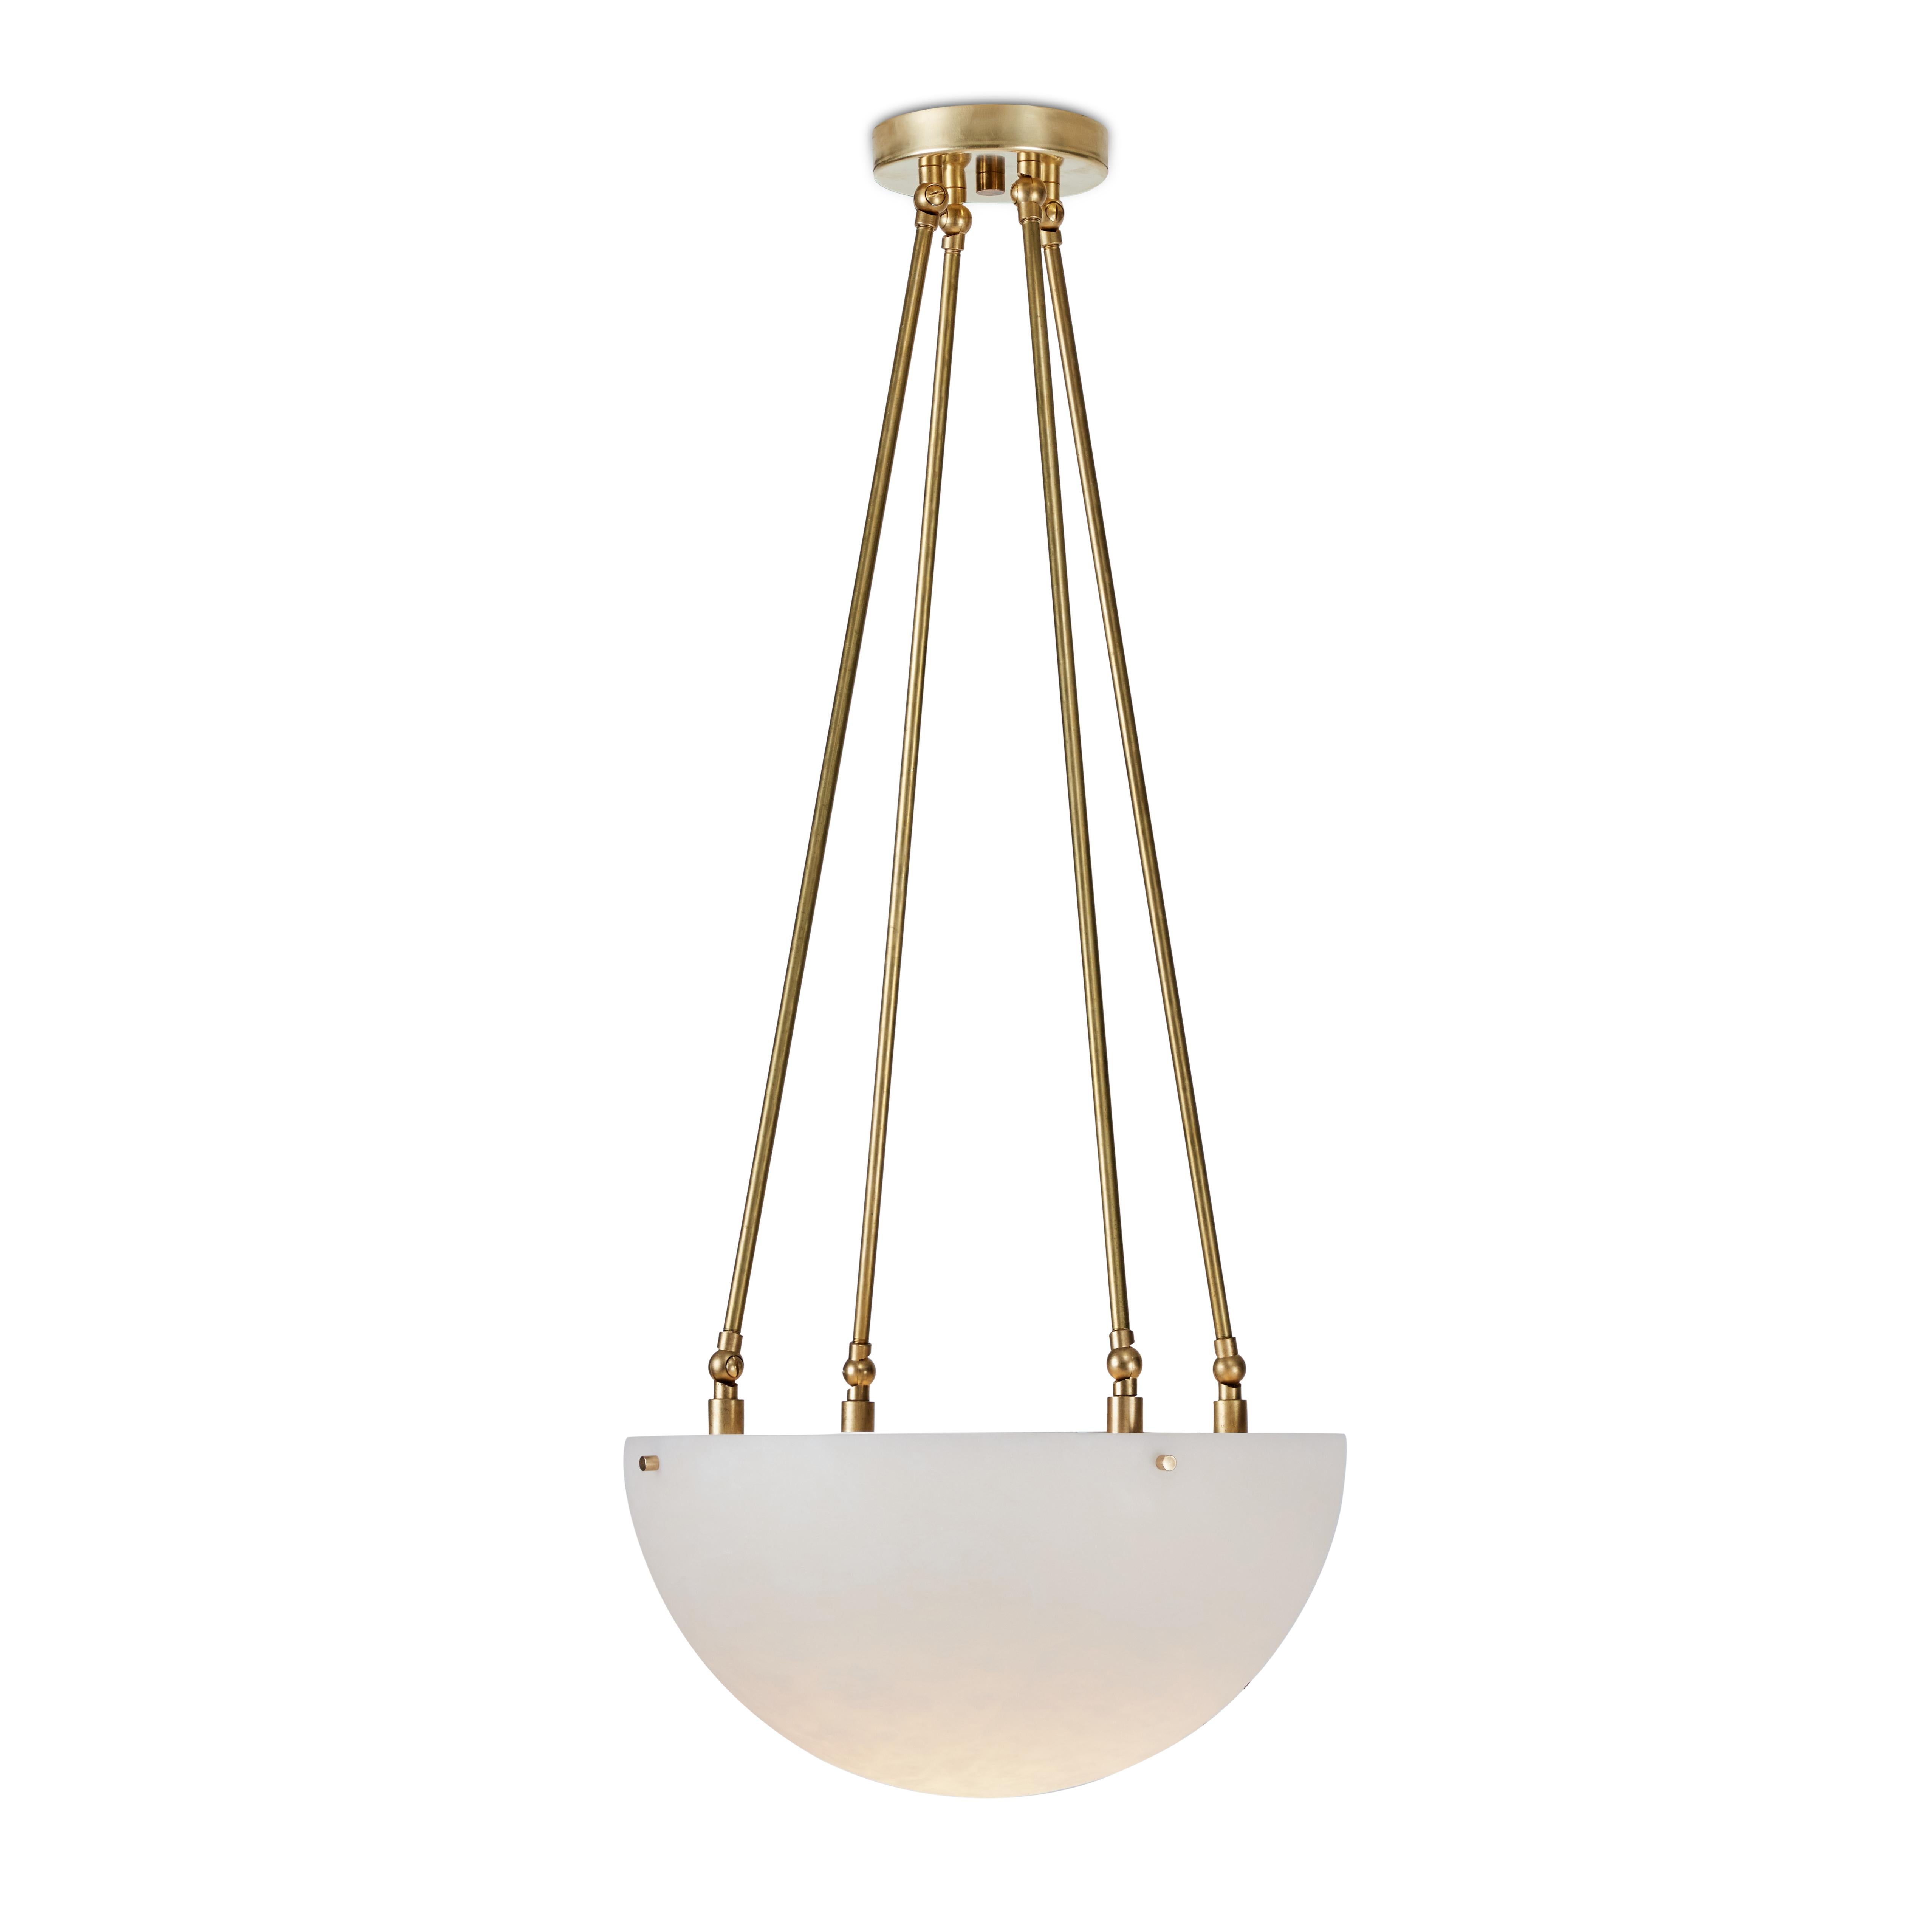 Large 'Moon' Alabaster and brass pendant lamp by Denis de la Mesiere. Handcrafted in Los Angeles in the workshop of noted French designer and antiques dealer Denis de le Mesiere, who meticulously pays homage to the work of Pierre Chareau with